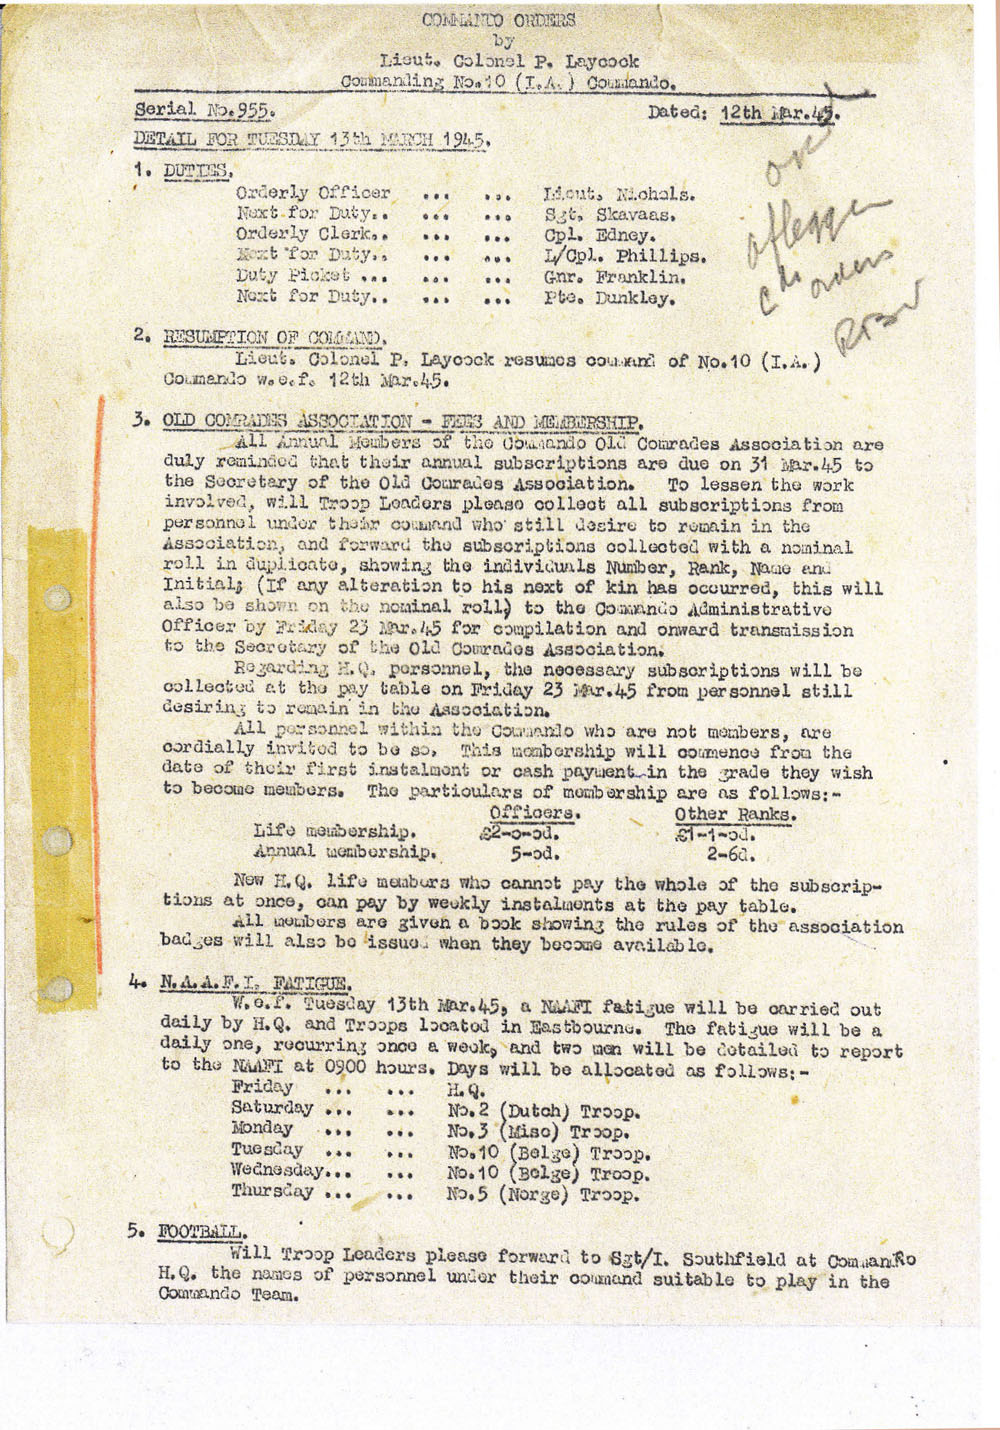 No.10IA Commando Orders by Lt. Col. Laycock - 12 March 1945